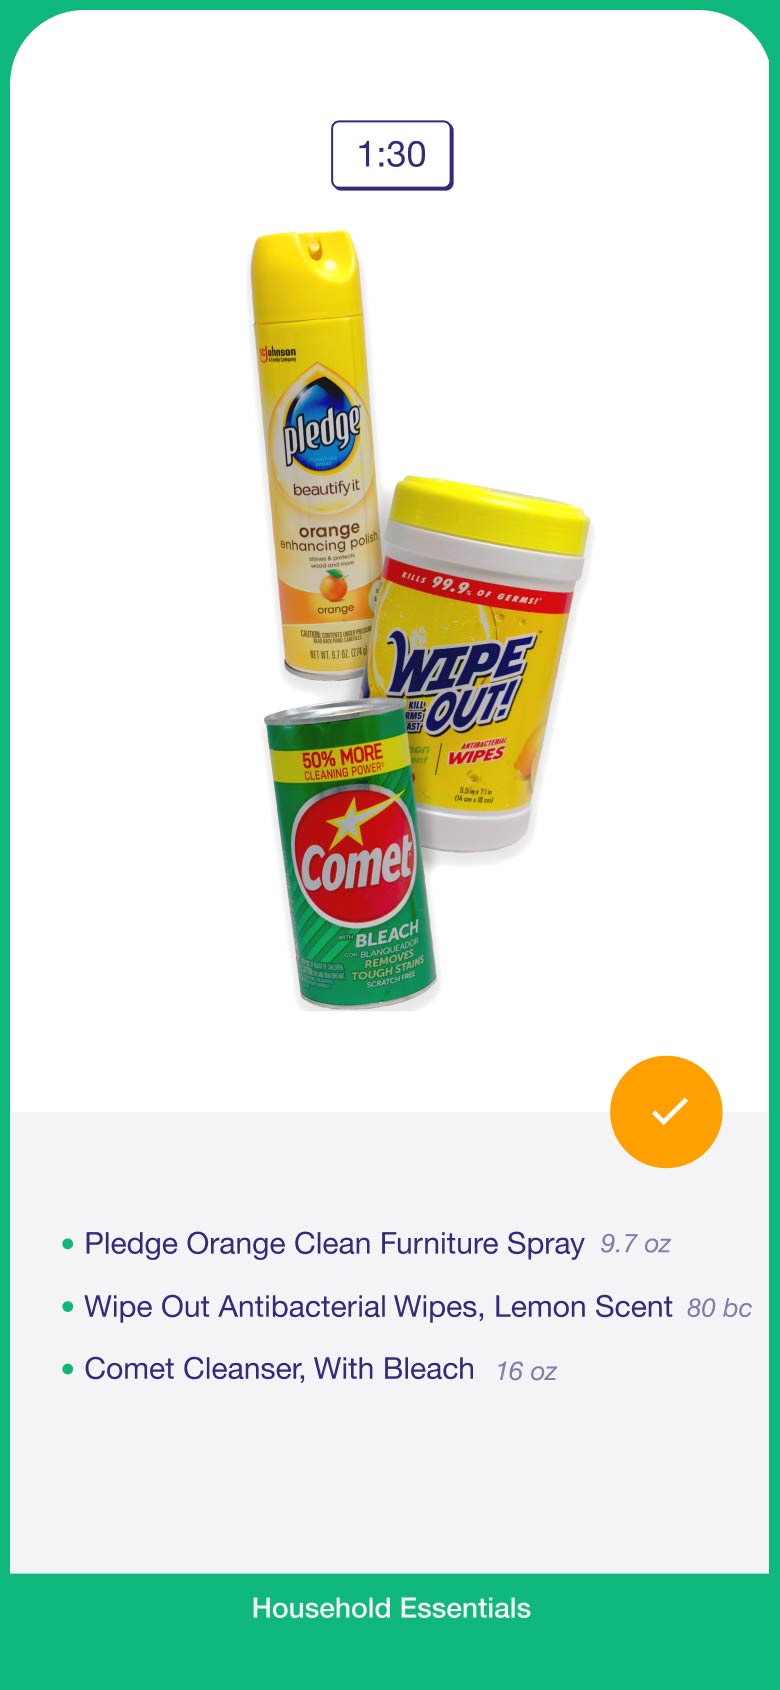 Laundry and cleaning bundle number 1: Pledge furniture spray, antibacterial wipes, and Comet cleanser